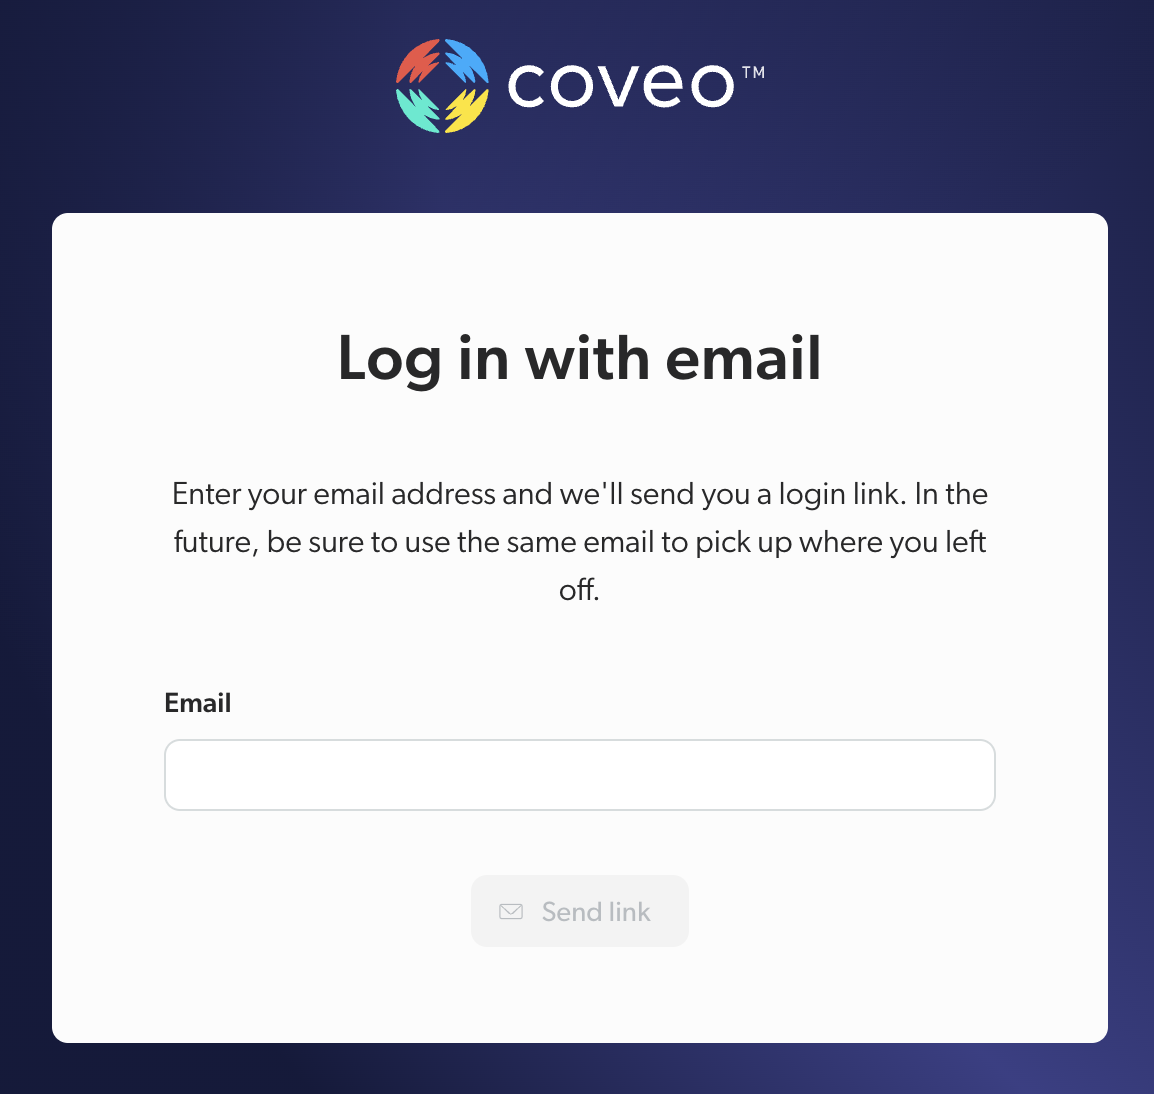 Coveo login with email